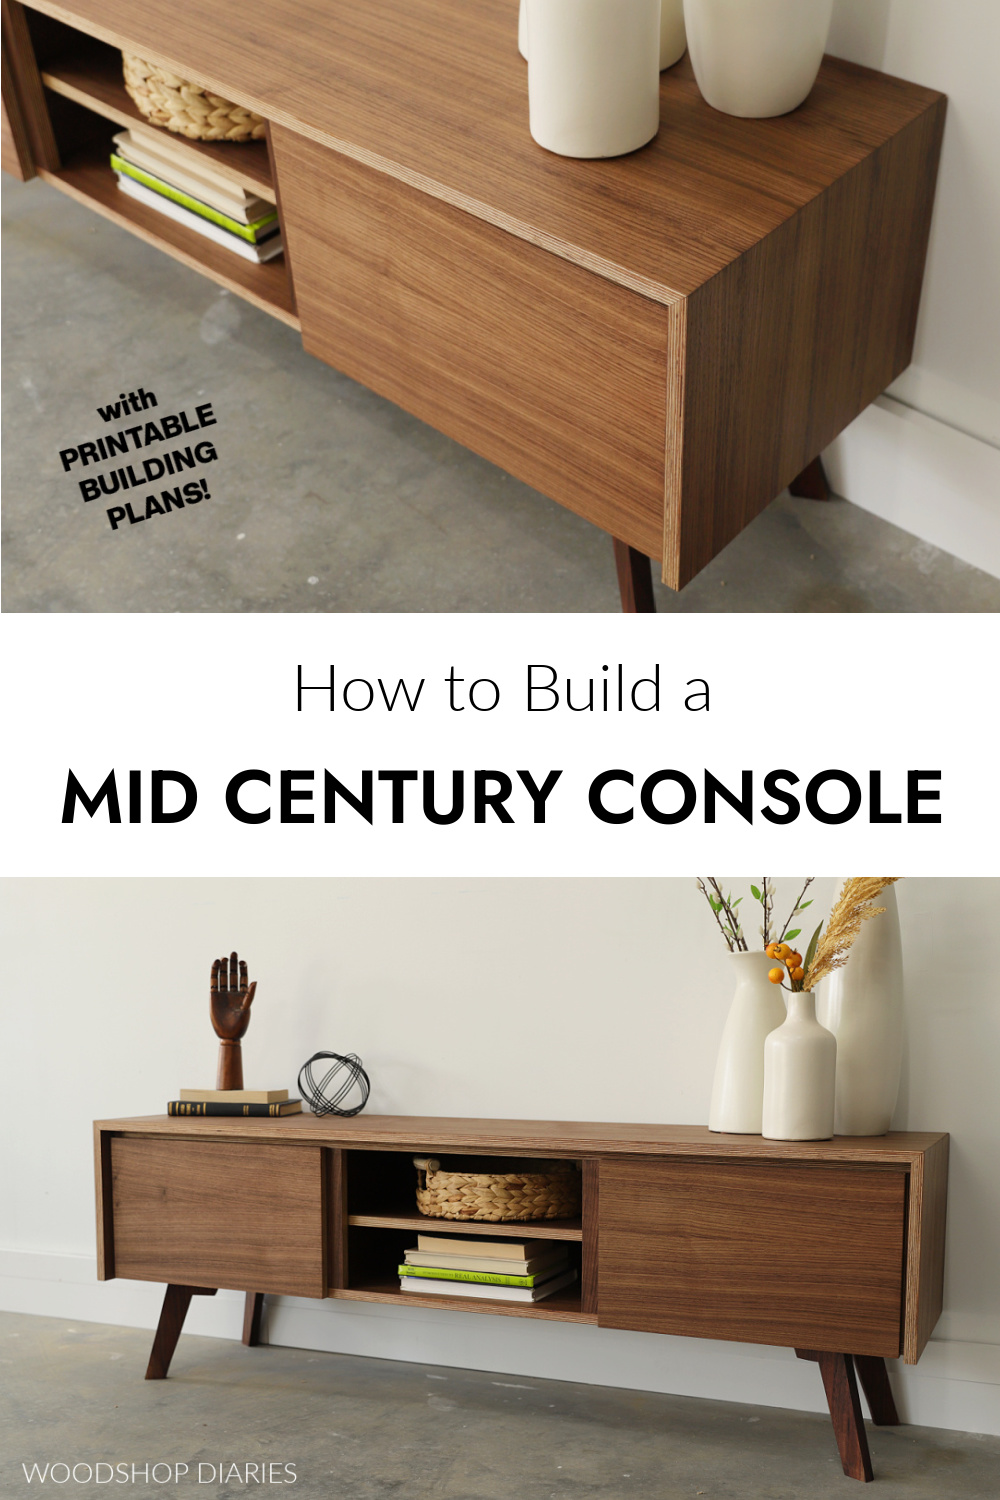 Pinterest collage image of DIY mid century modern console--top image showing continuous grain plywood and bottom image showing full console completed with text "how to build a mid century console"